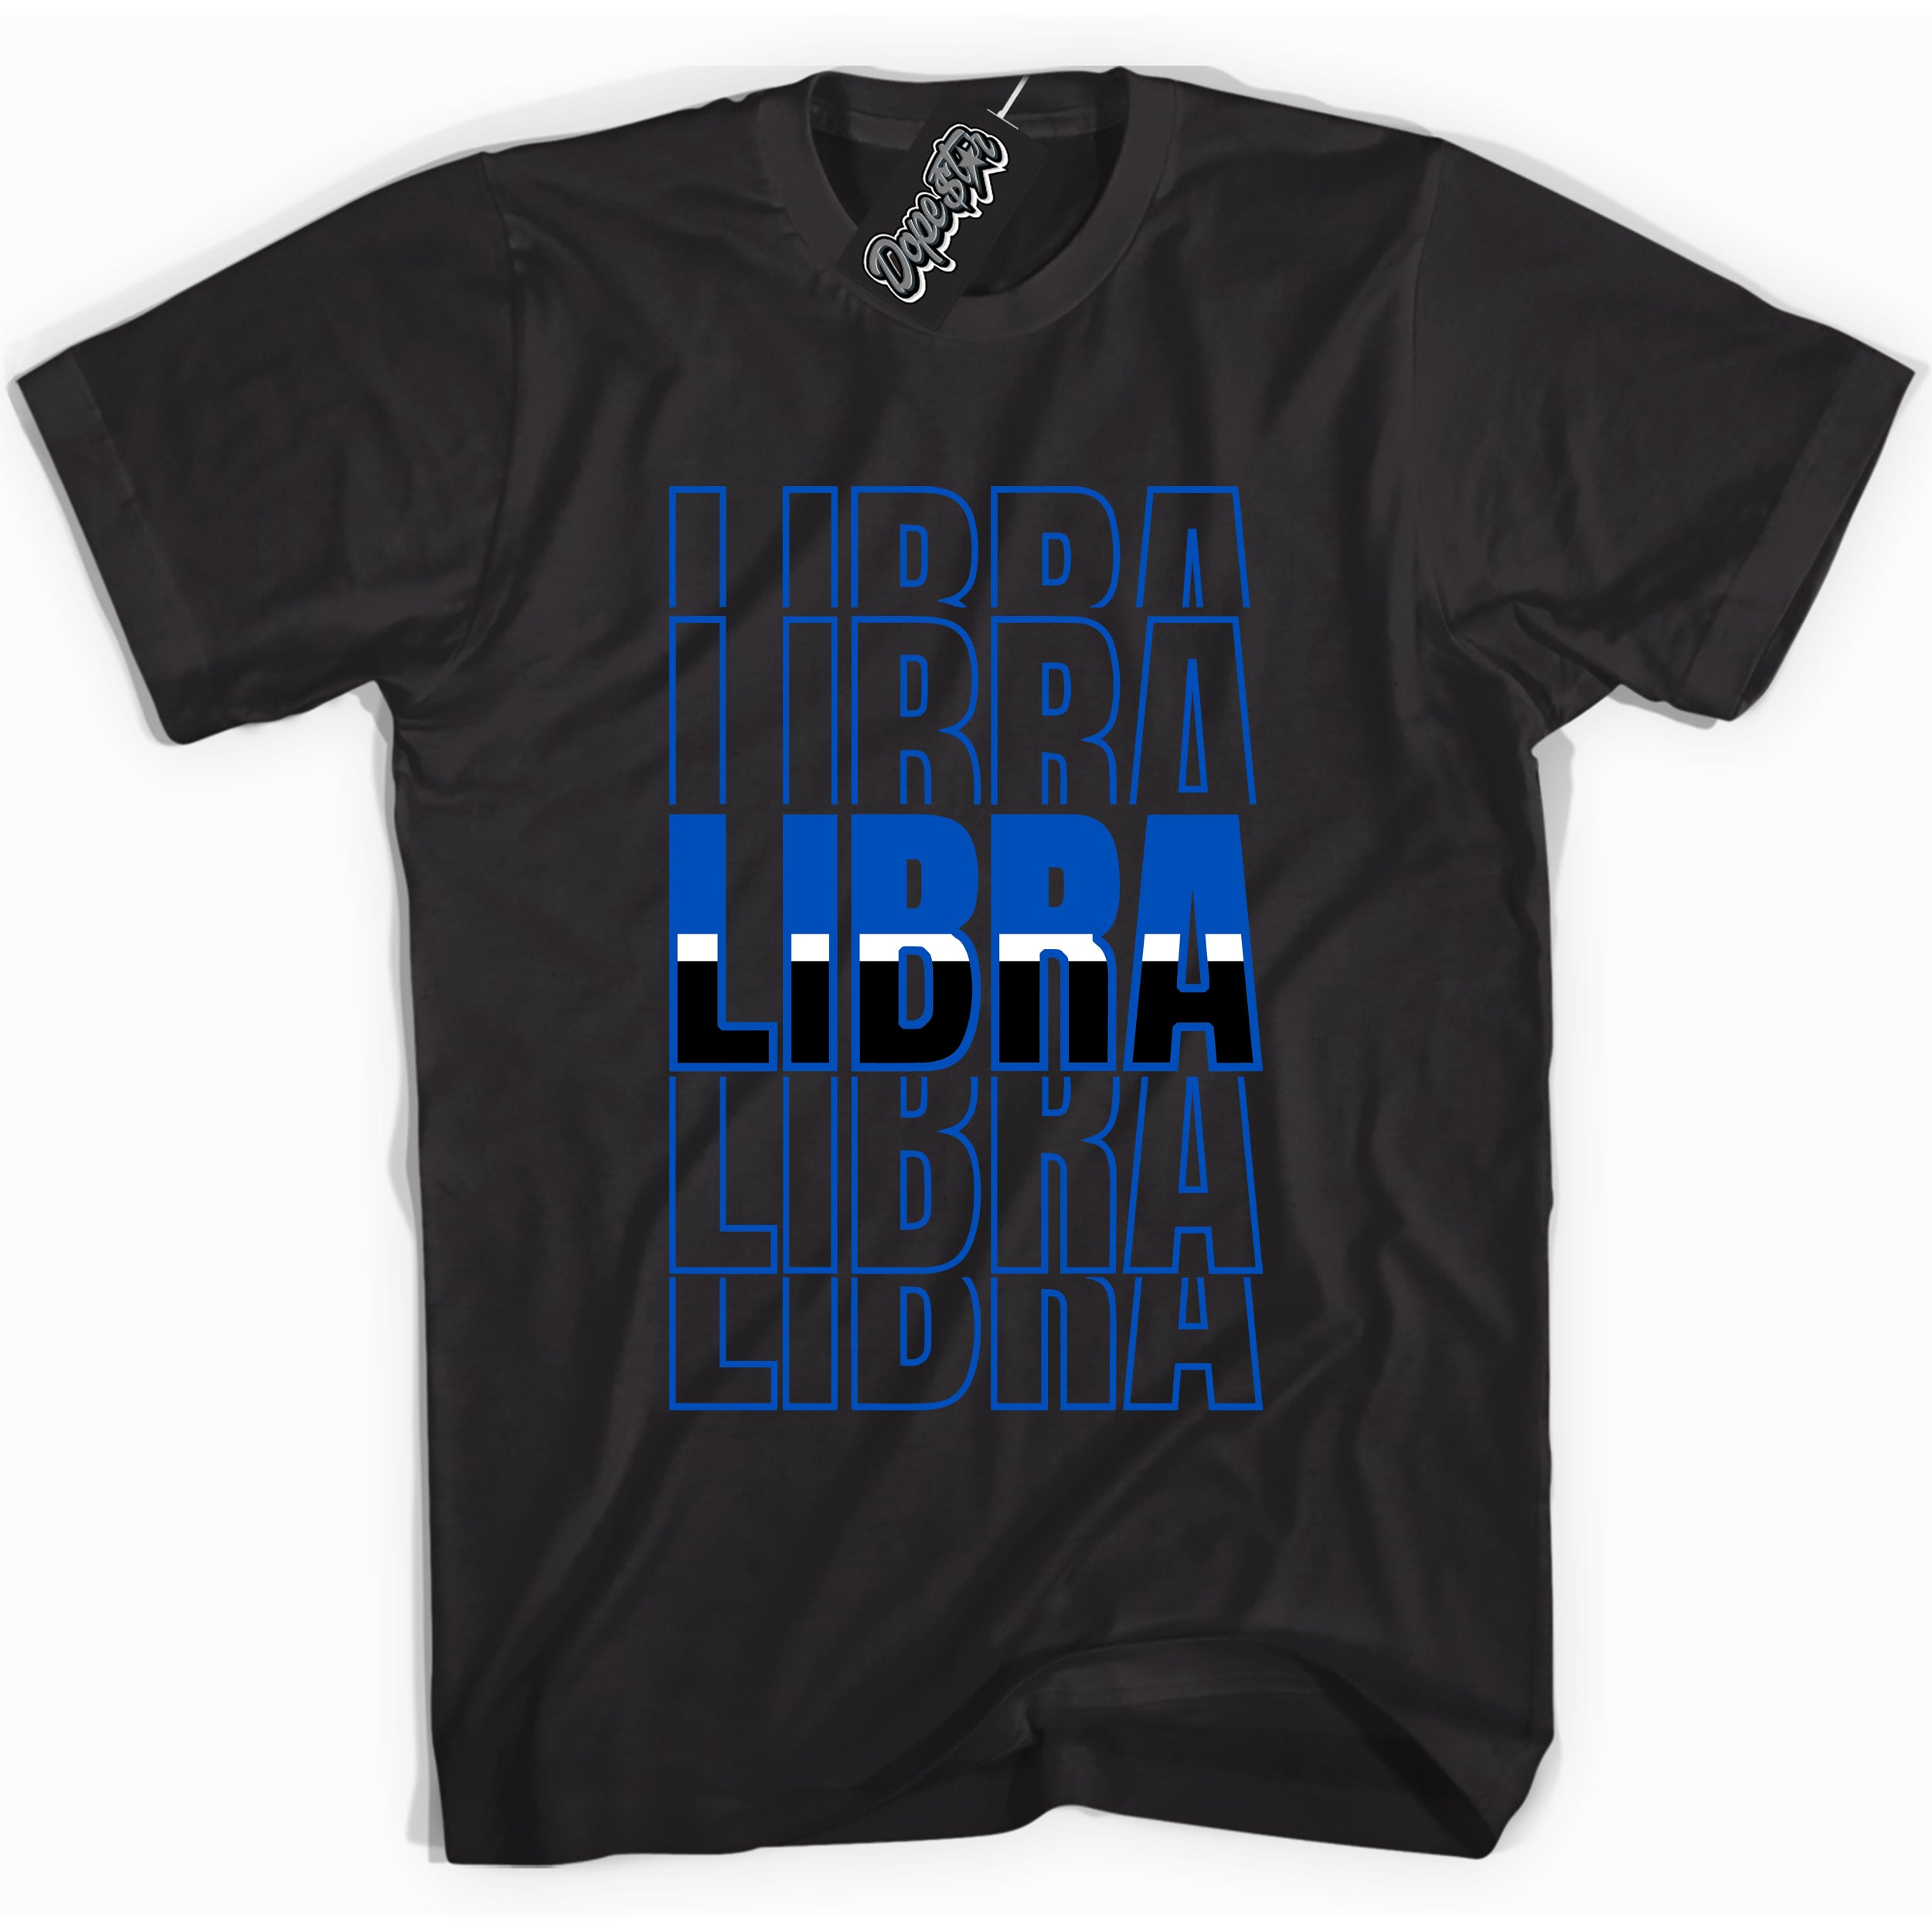 Cool Black graphic tee with "Libra" design, that perfectly matches Royal Reimagined 1s sneakers 